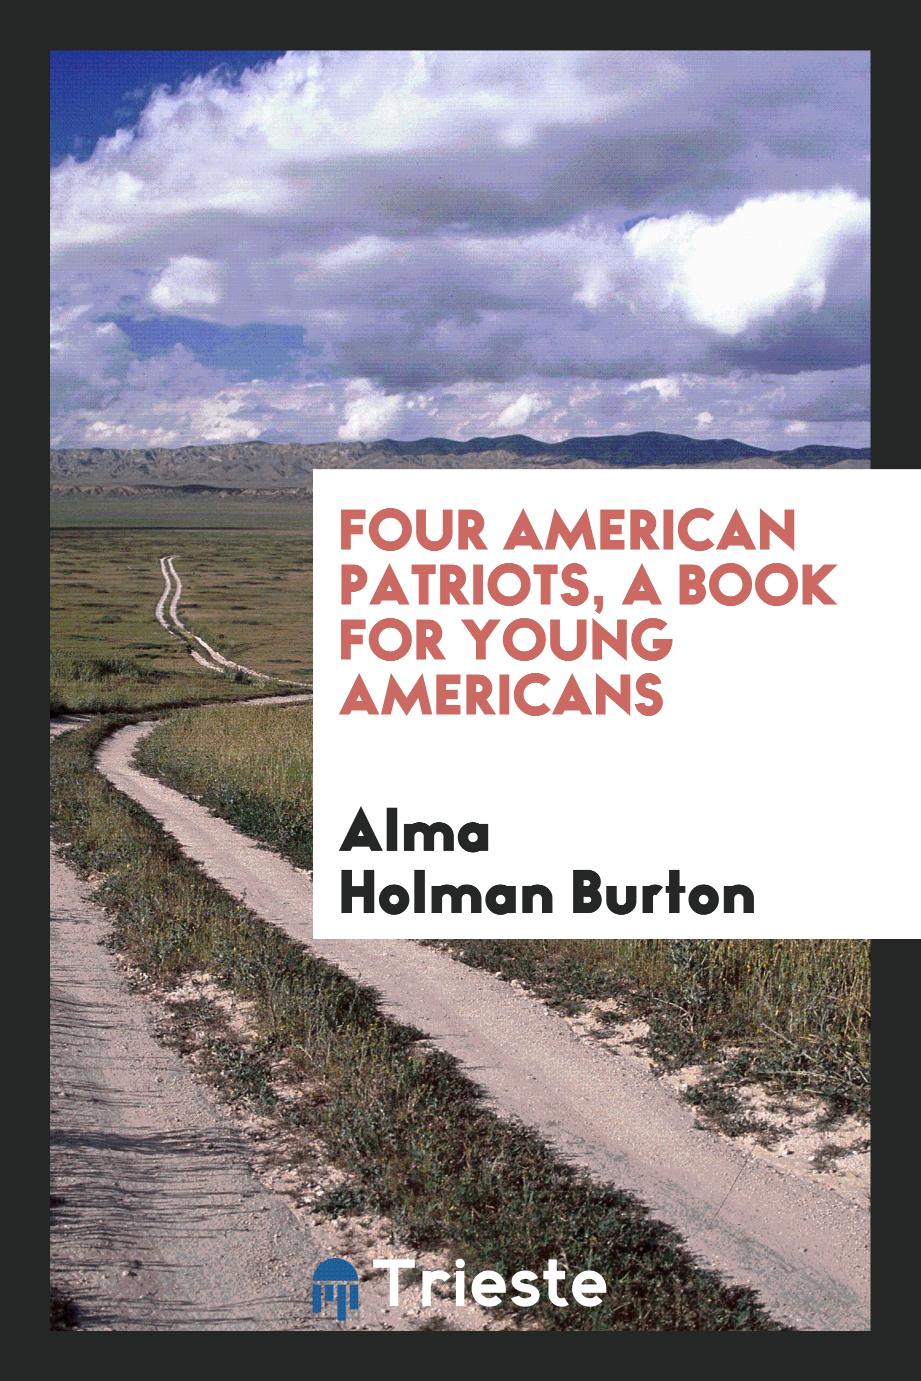 Four American Patriots, a Book for Young Americans